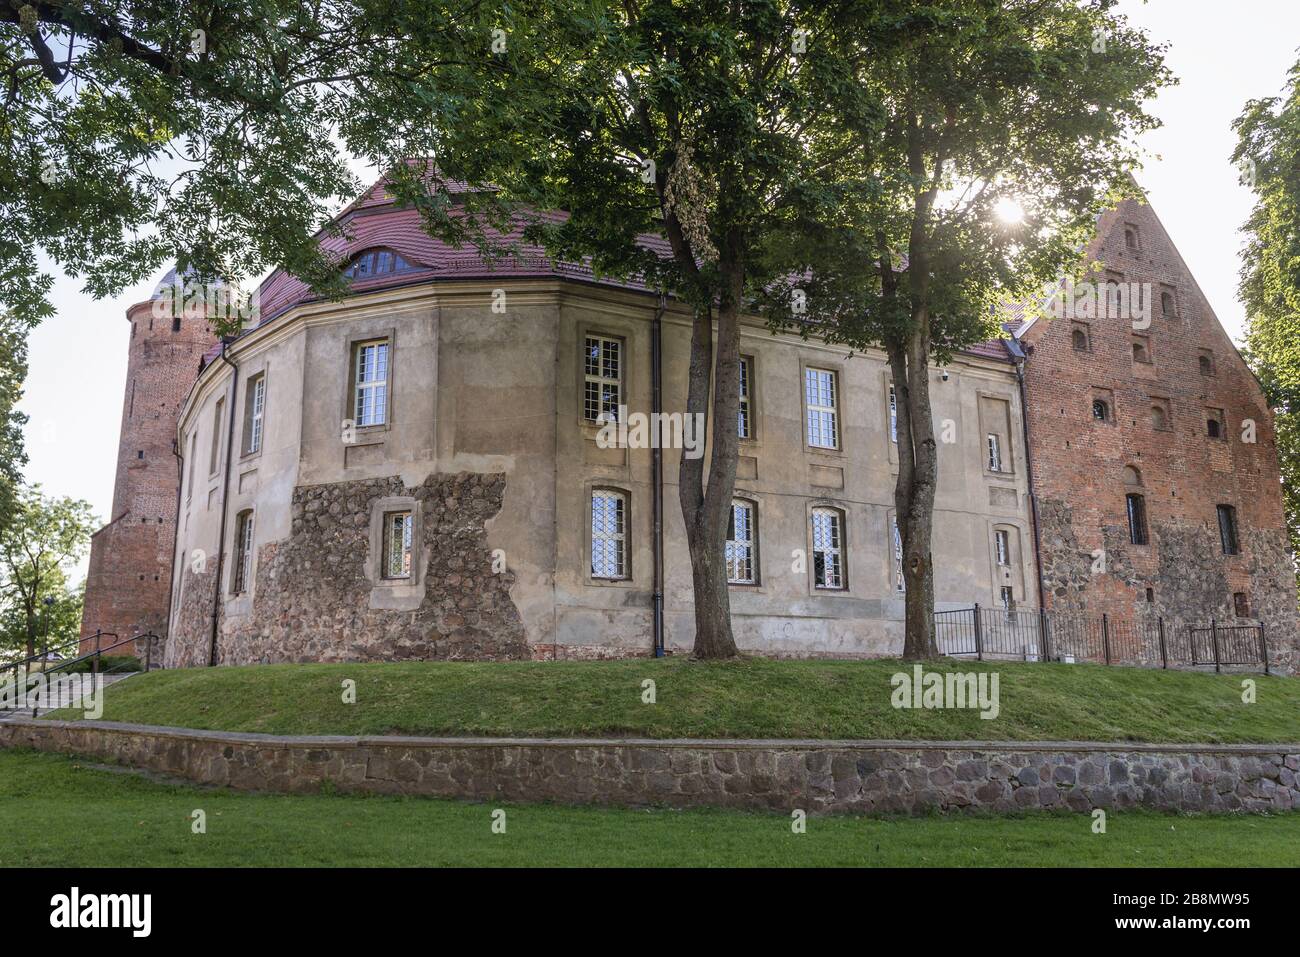 Wall of medieval knights castle in Swidwin, capital of Swidwin County in West Pomeranian Voivodeship of northwestern Poland Stock Photo